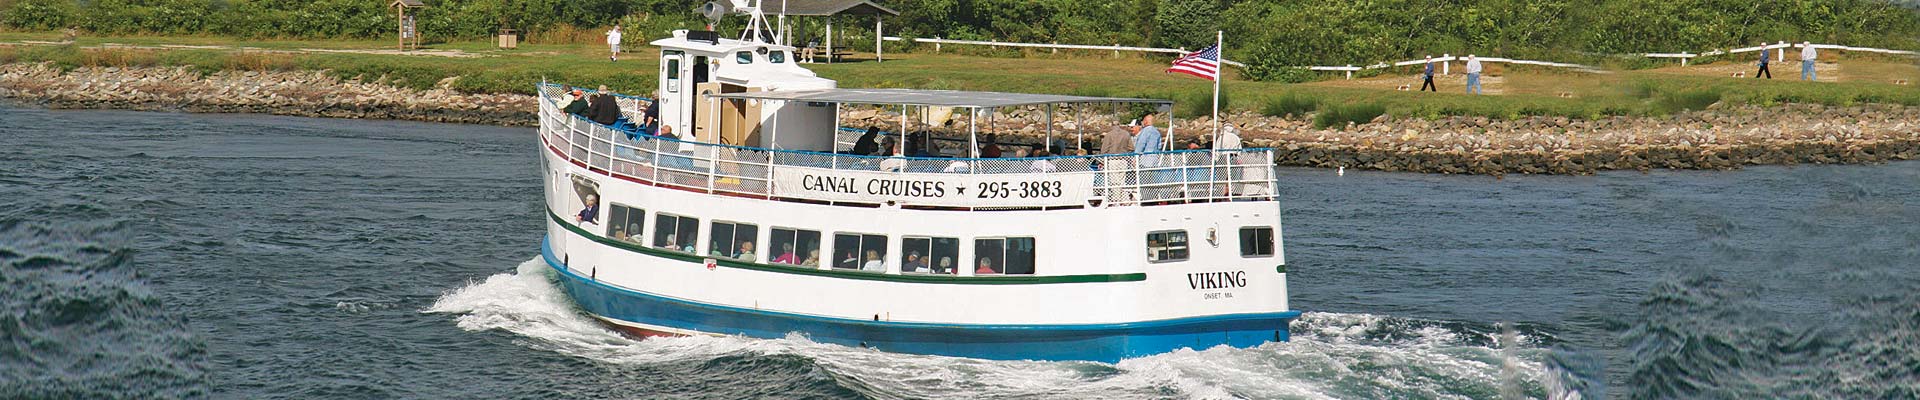 Image result for hy line cruises cape cod free images